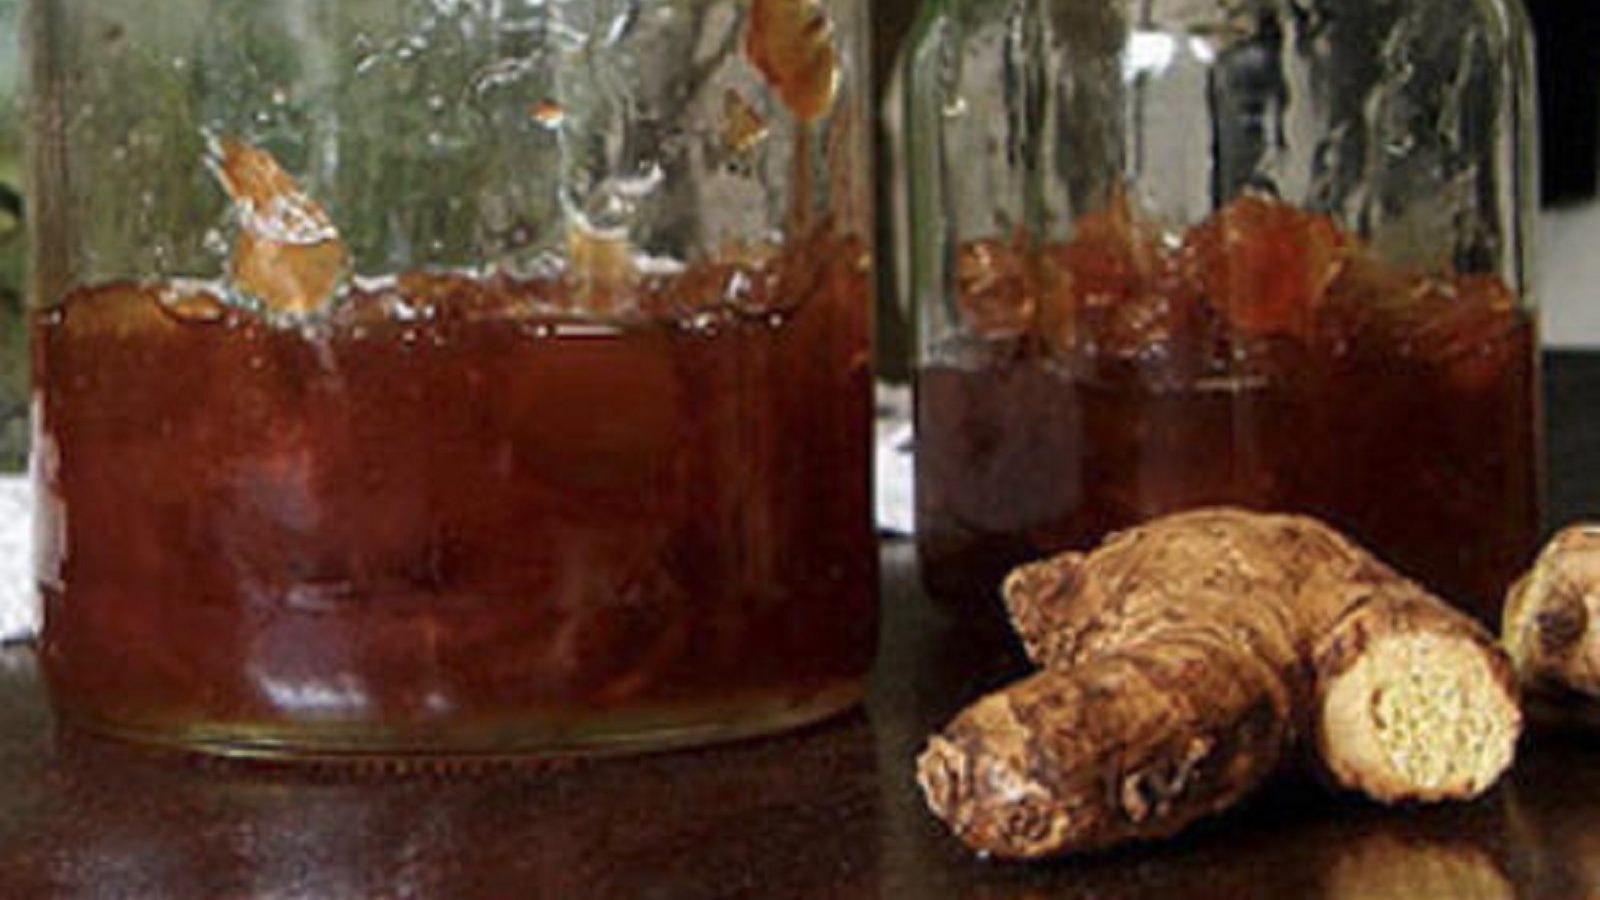 Ginger marmalade will eliminate the problem of constipation know the benefits of eating it